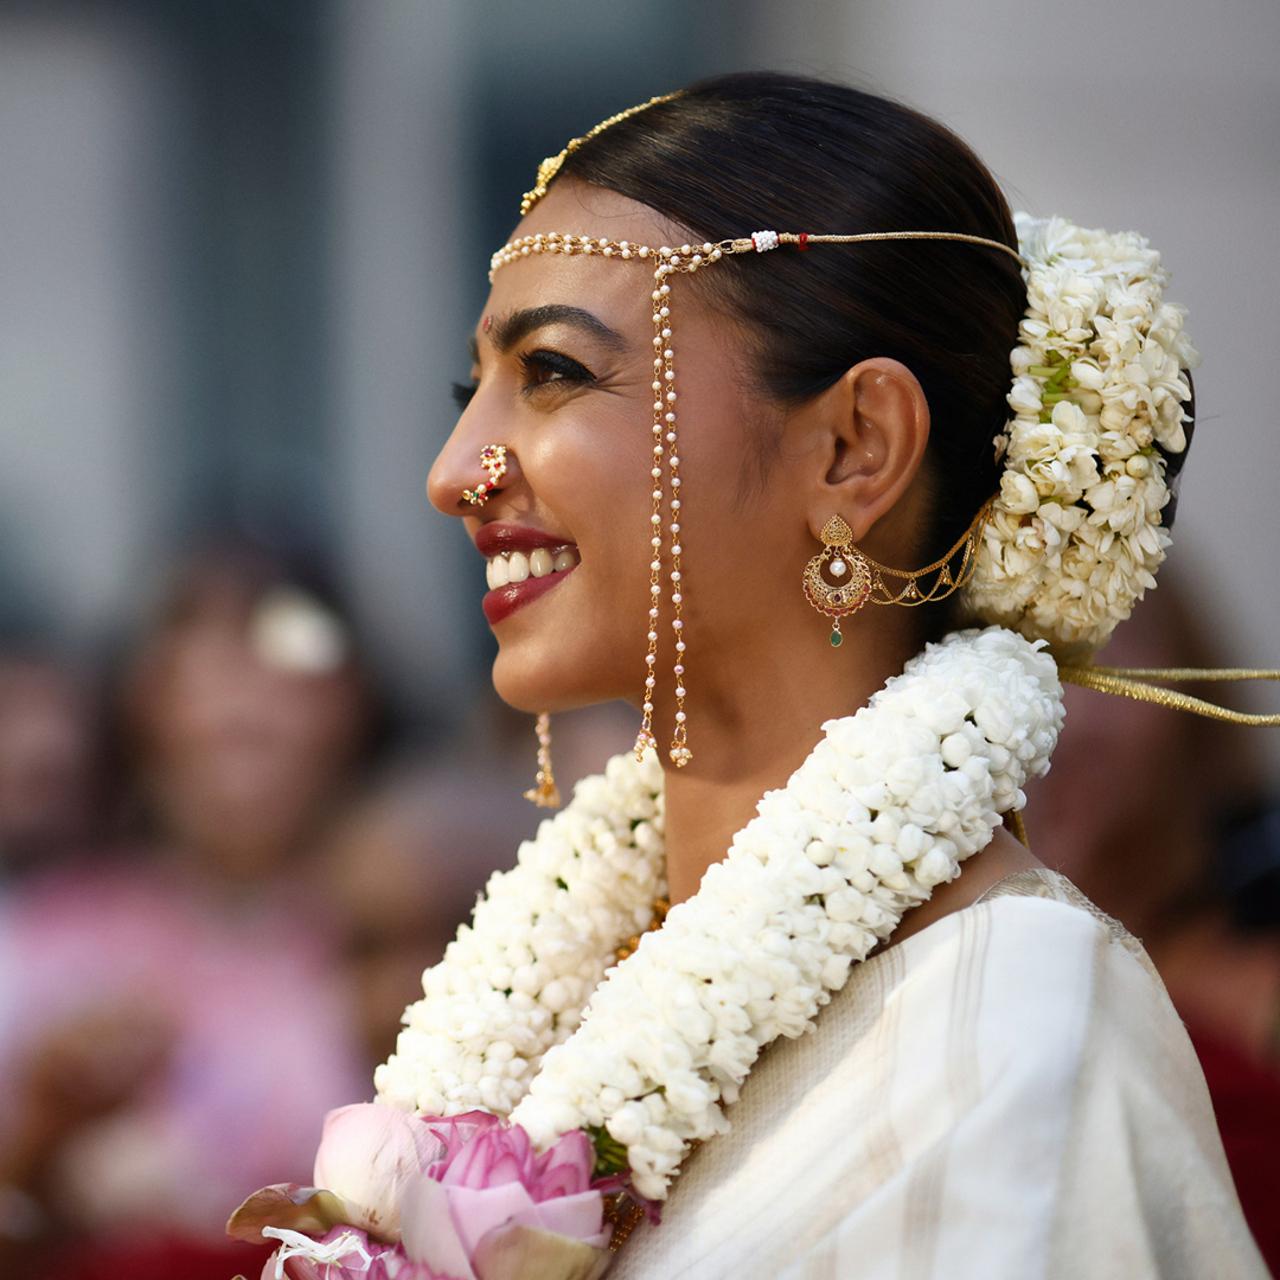 Radhika Apte looks like the perfect 'Marathi mulgi' is her traditional gold jewellery, garland and gajra. The 'nath' (nosering) caps it off!